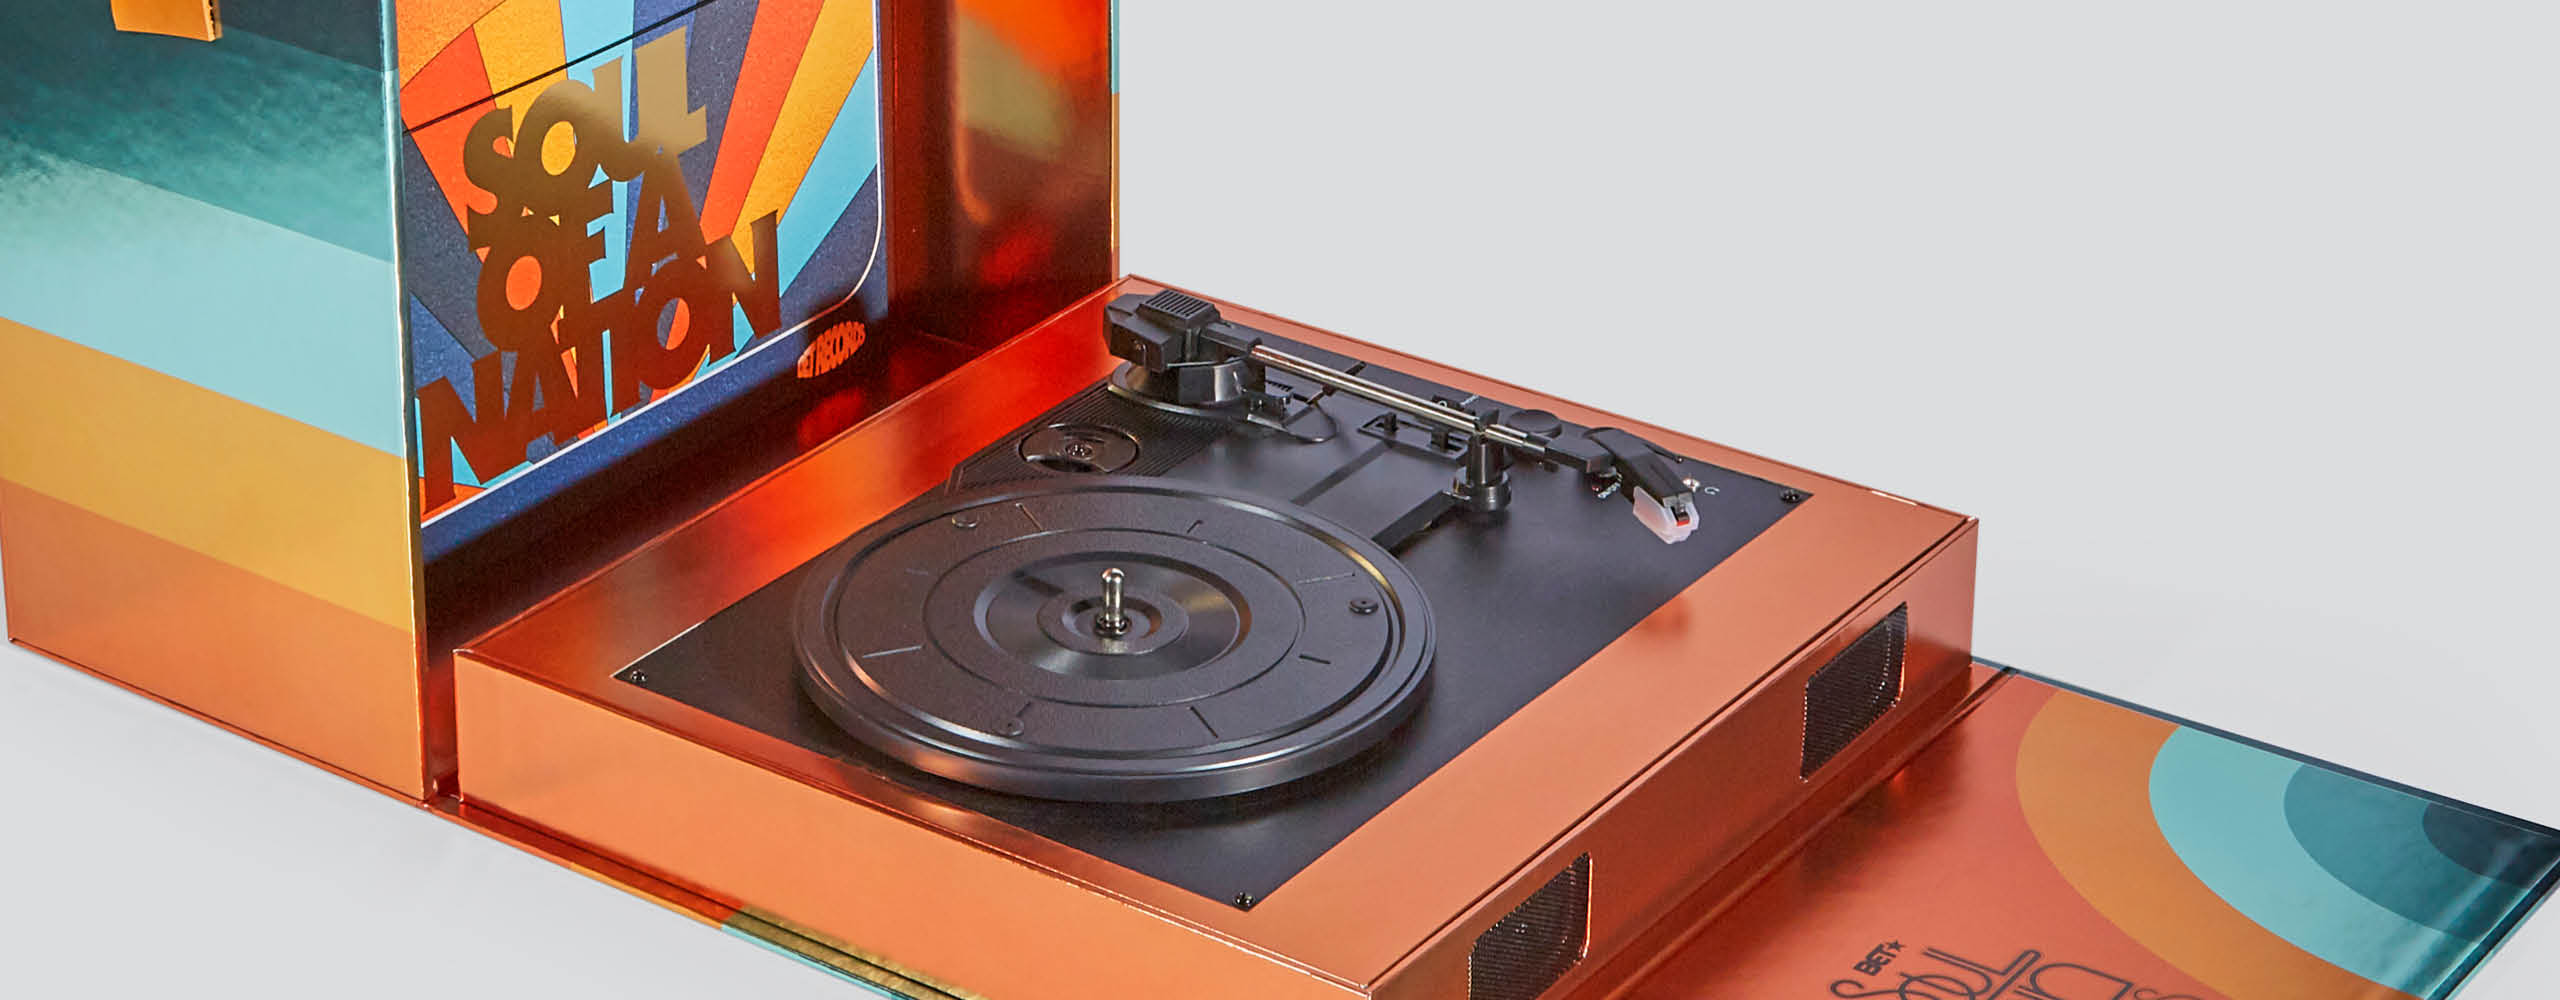 record player influencer kit - creative and design